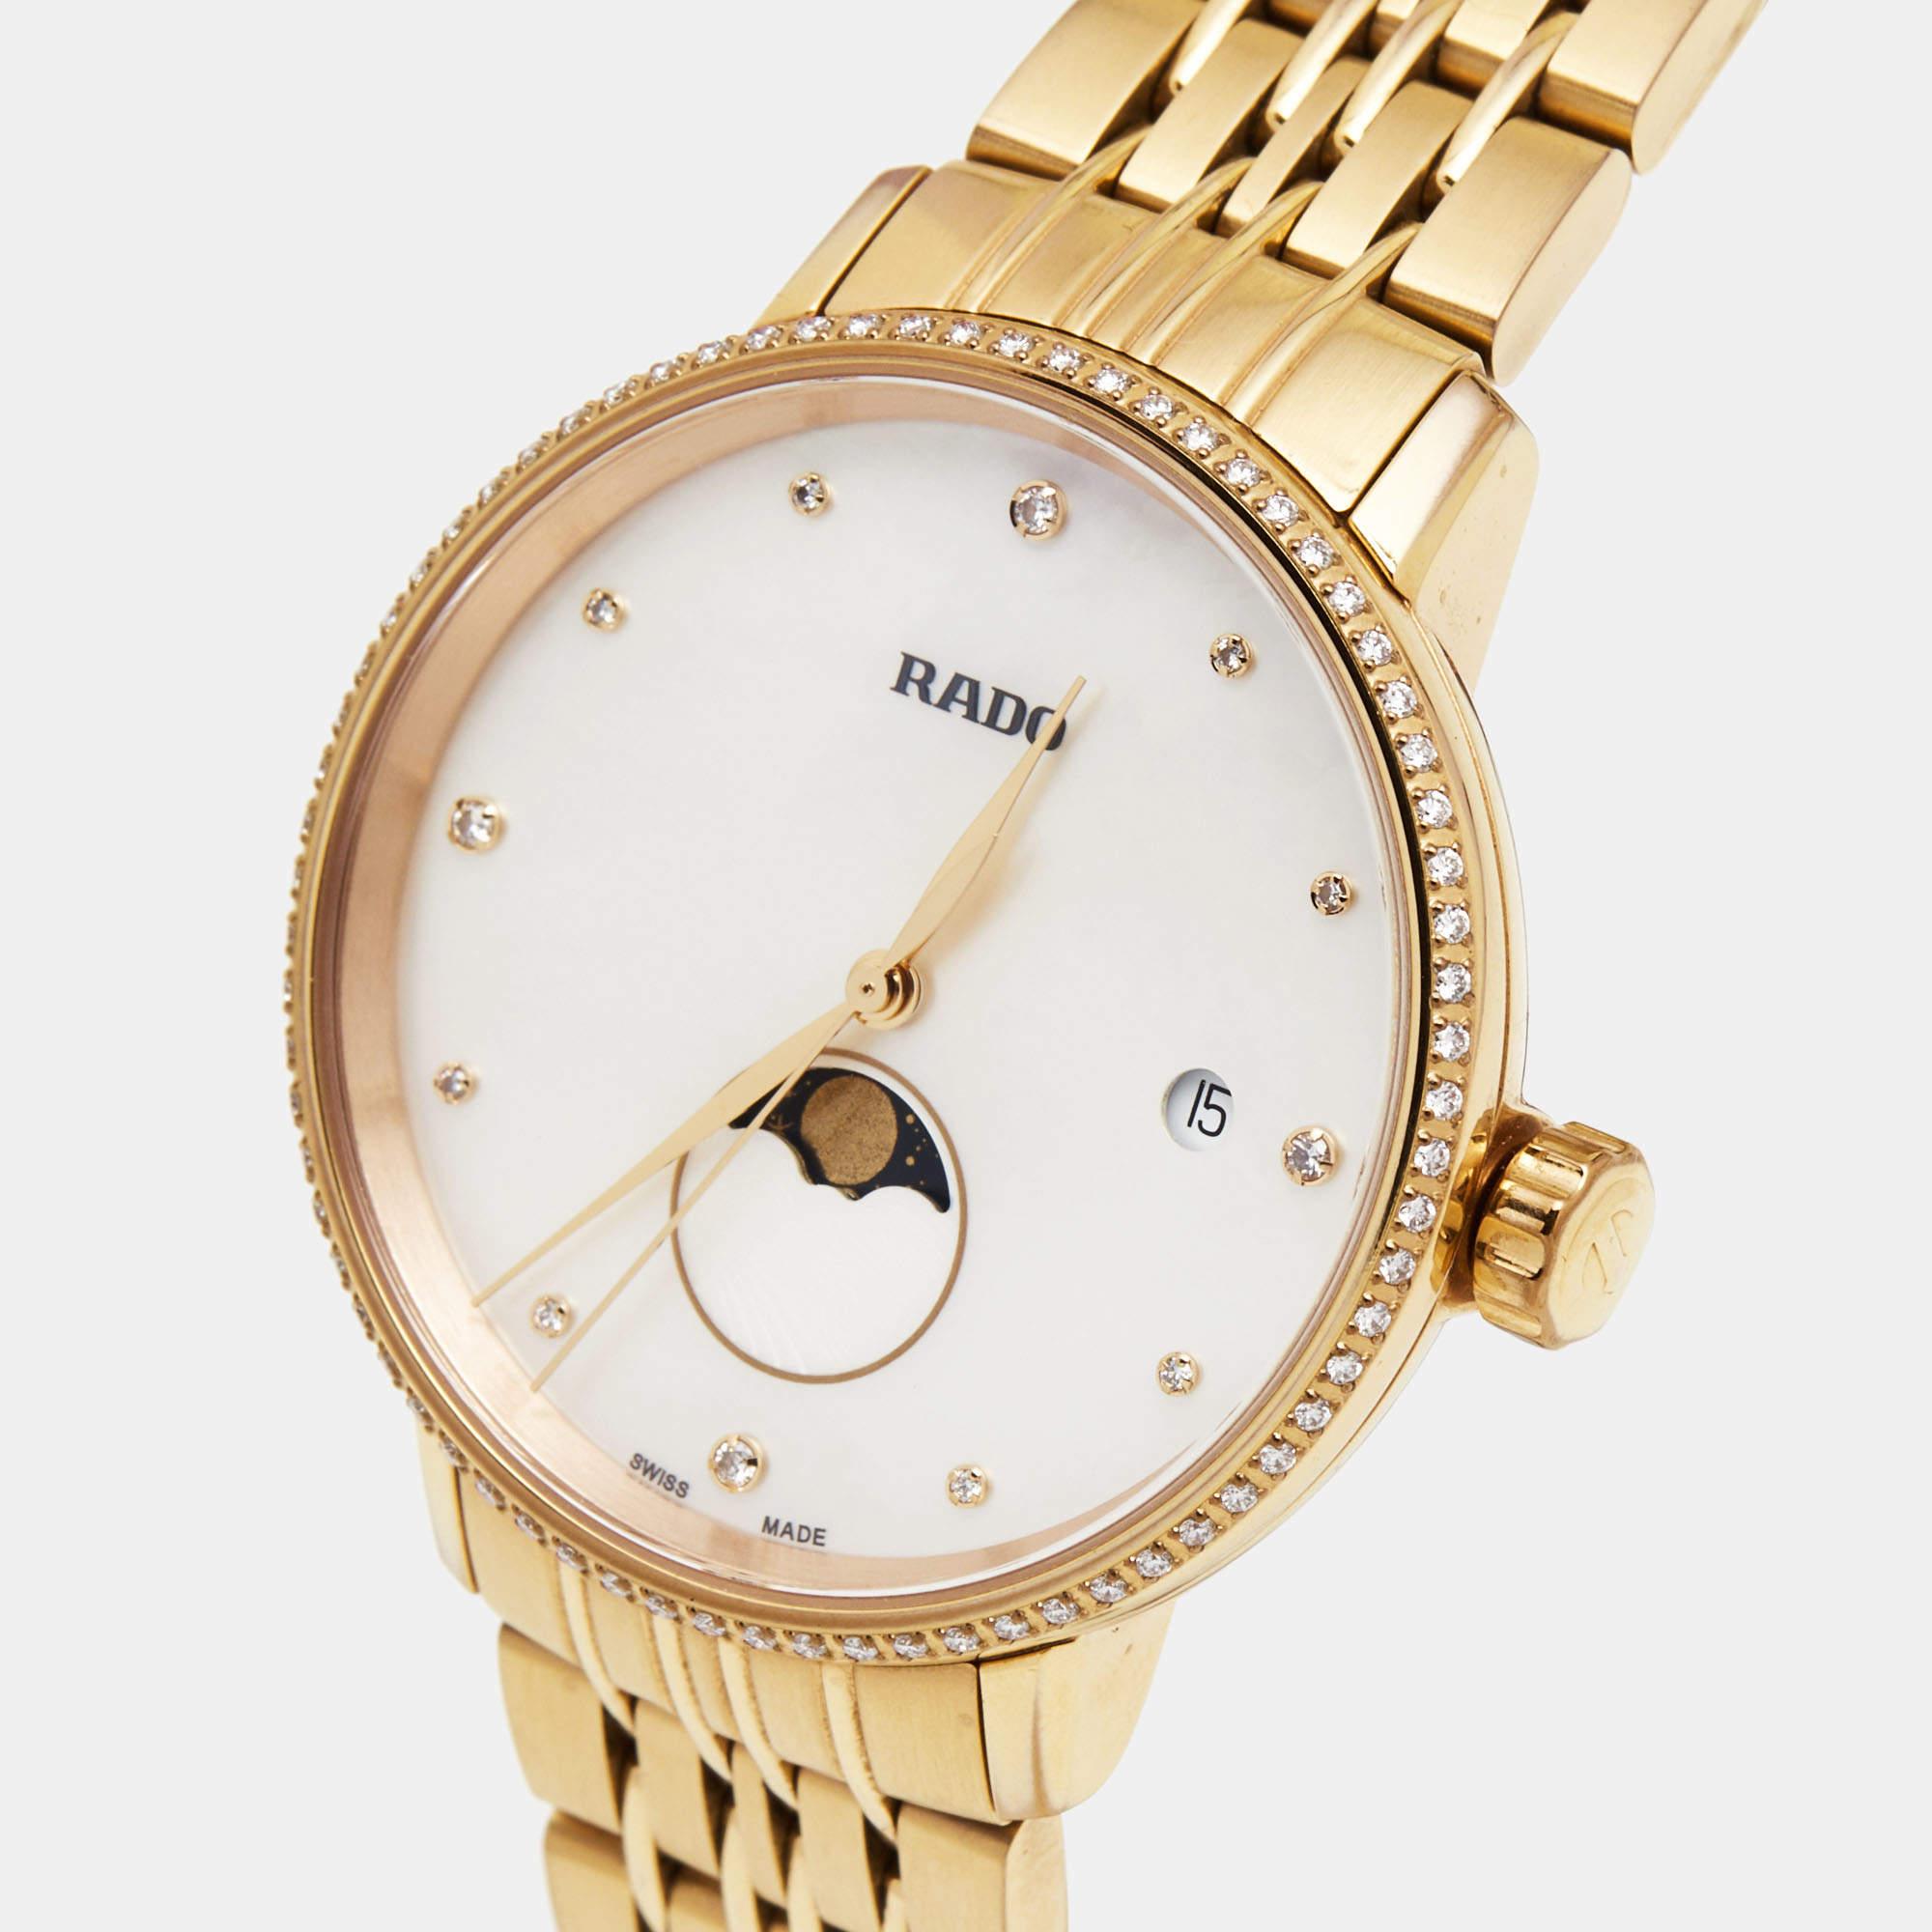 The Rado Coupole R22884923 is an exquisite women's wristwatch. It features a stunning mother-of-pearl dial with diamond hour markers that add a touch of elegance. The watch is beautifully crafted with a rose gold-plated stainless steel case and